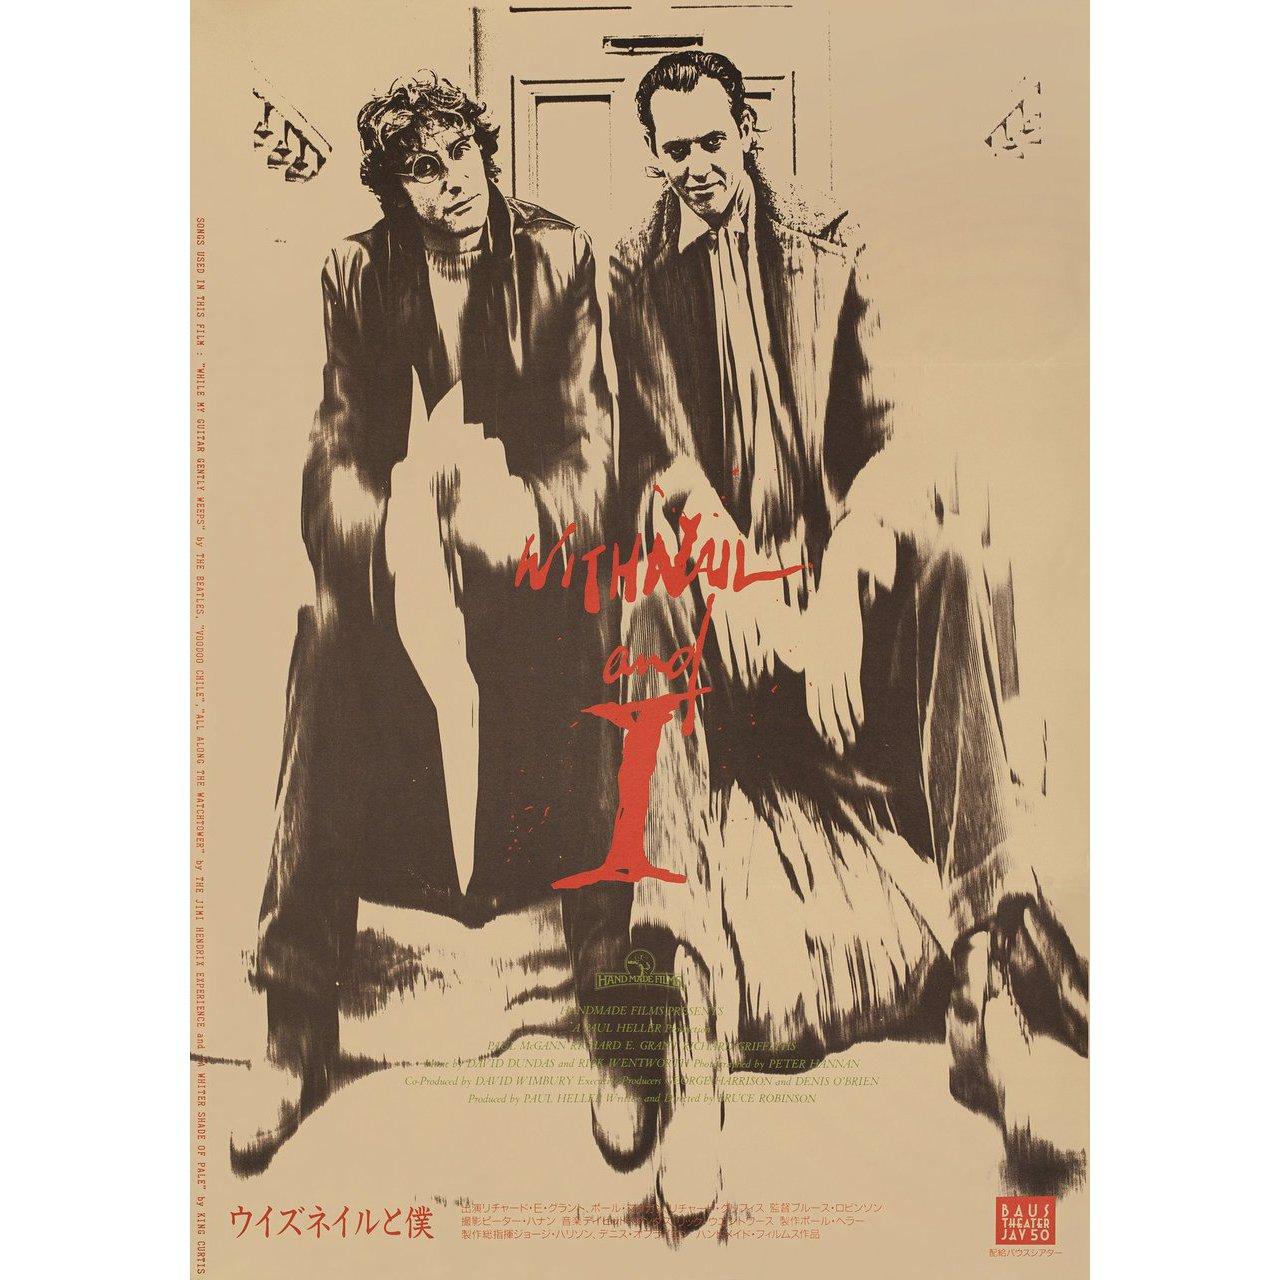 Original 1987 Japanese B2 poster for the film Withnail & I directed by Bruce Robinson with Richard E. Grant / Paul McGann / Richard Griffiths / Ralph Brown. Very Good-Fine condition, folded. Many original posters were issued folded or were